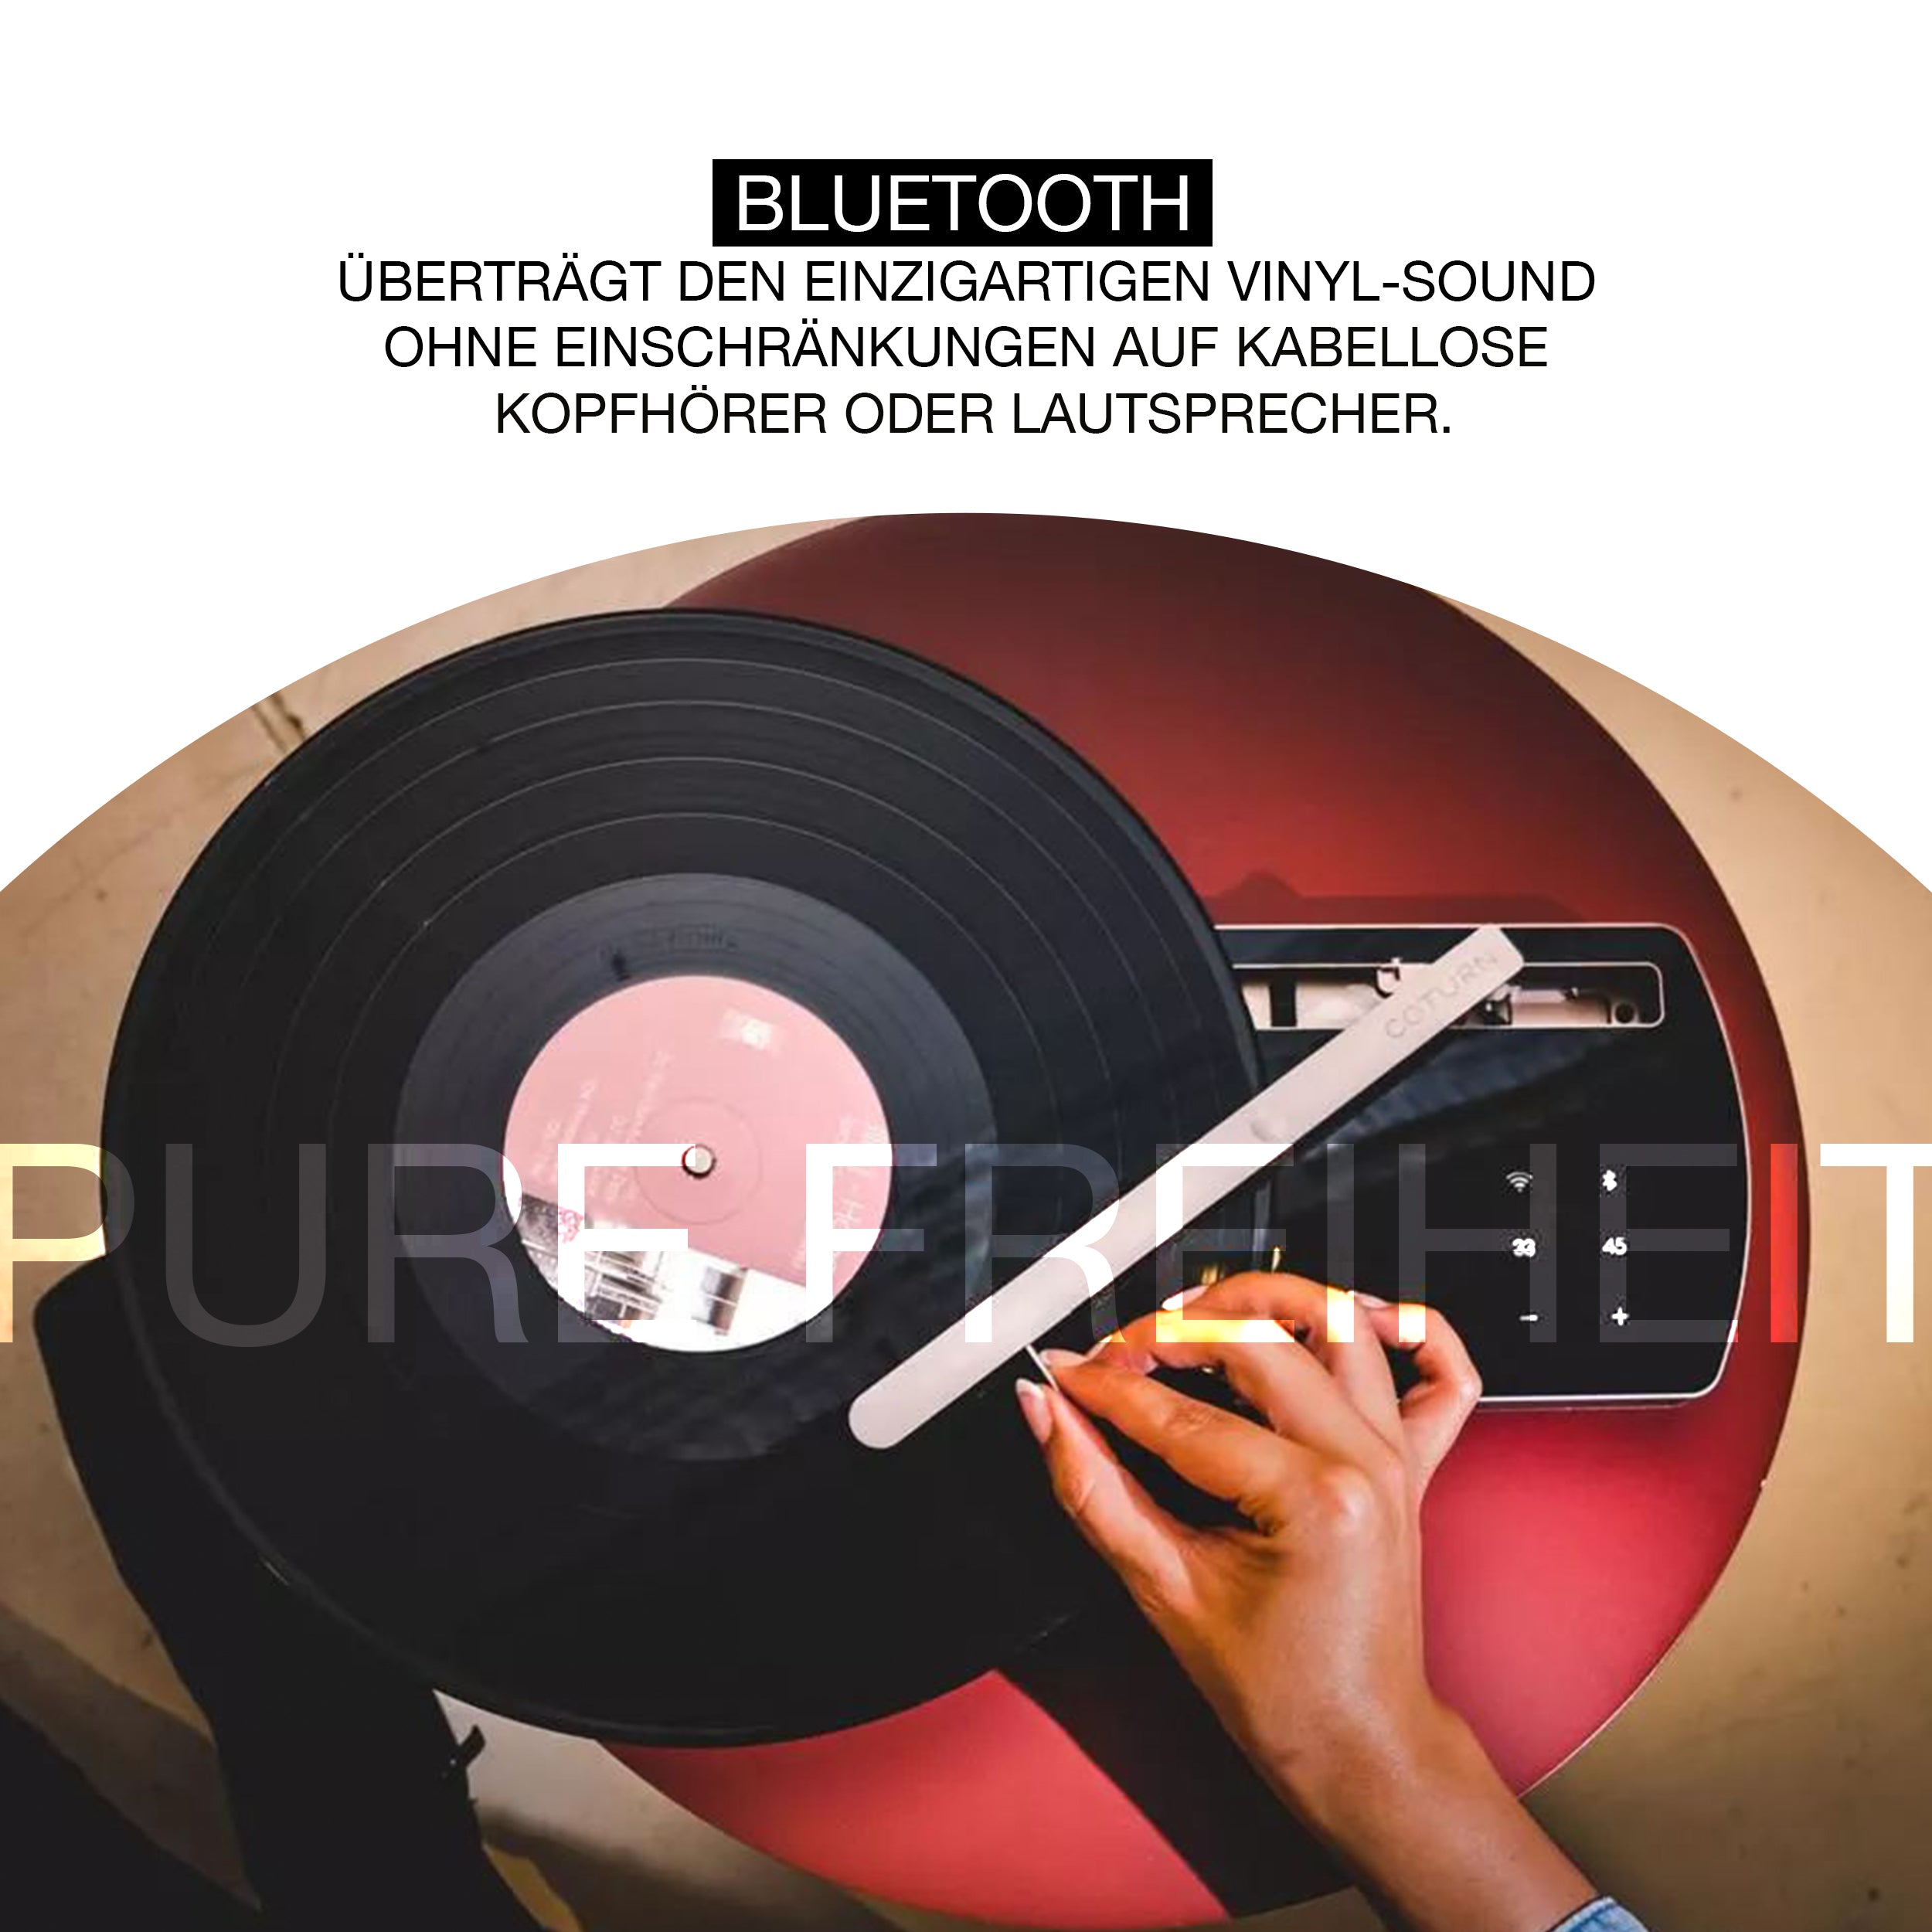 Portable Bluetooth Turntable – Coturn CT-01 Blue